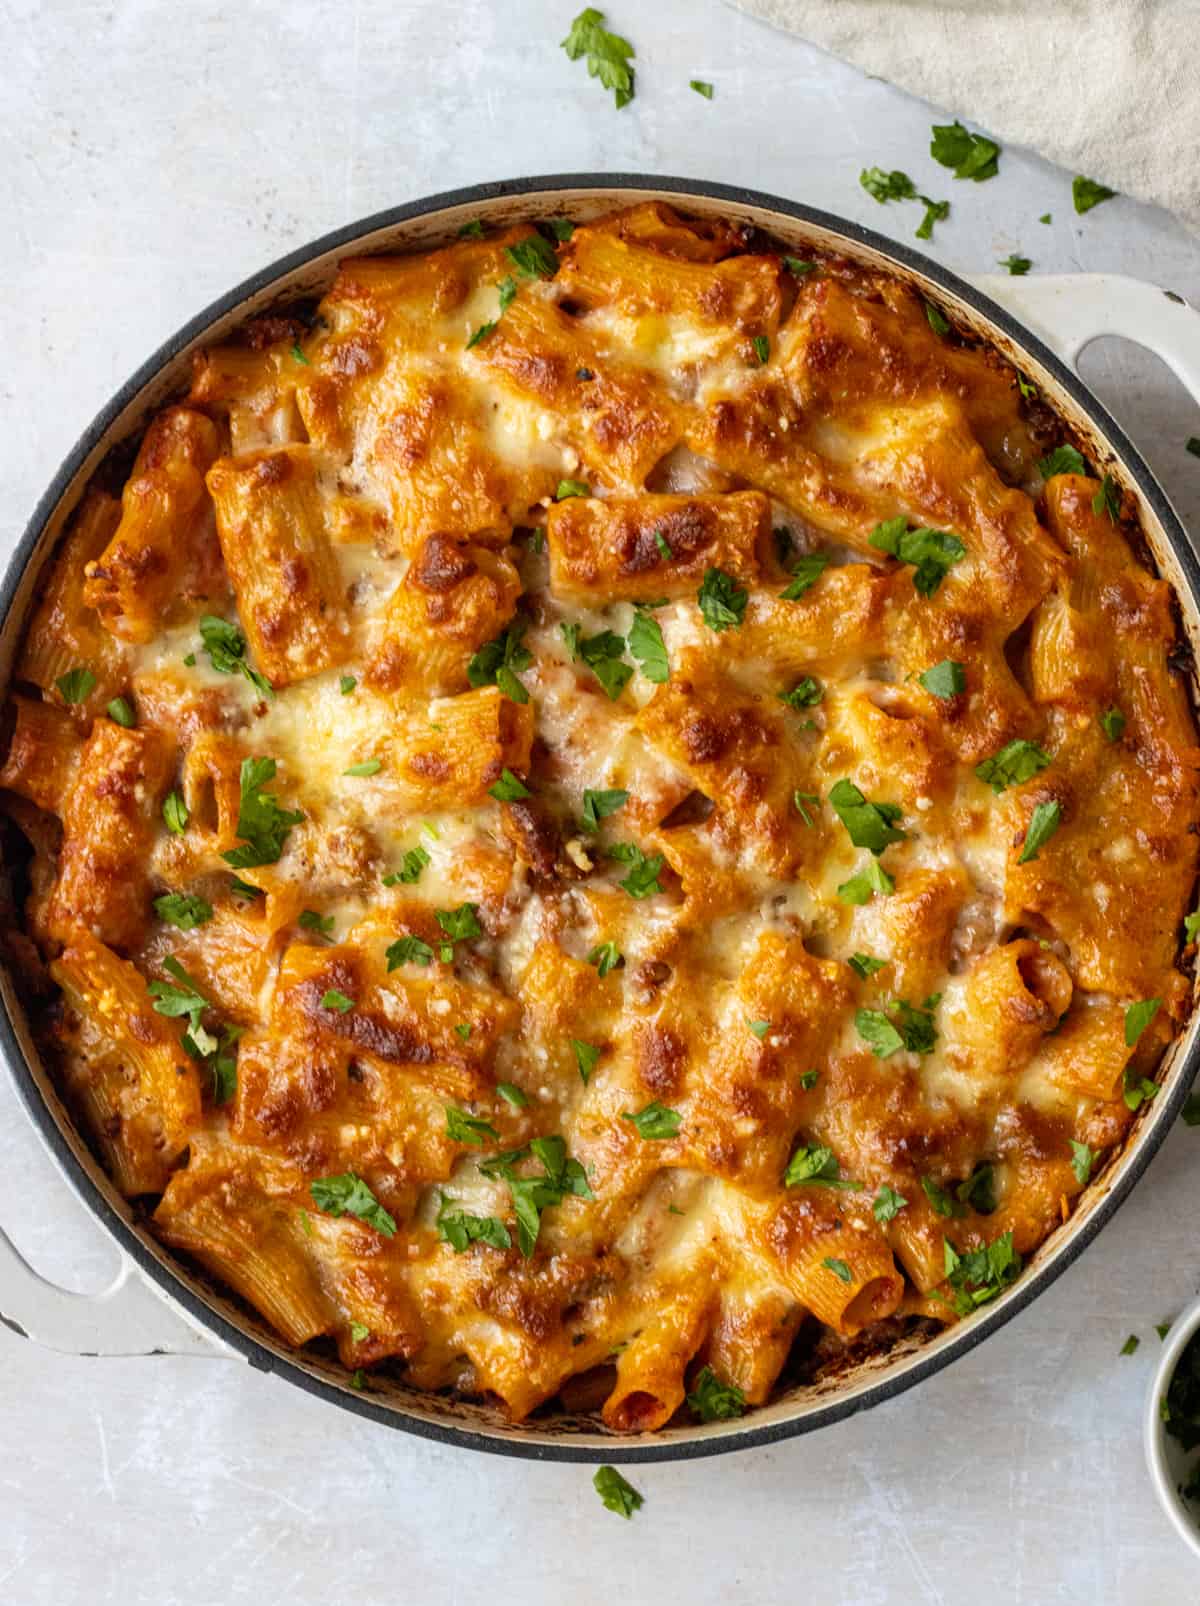 Baked rigatoni with sausage topped with chopped parsley in a skillet.